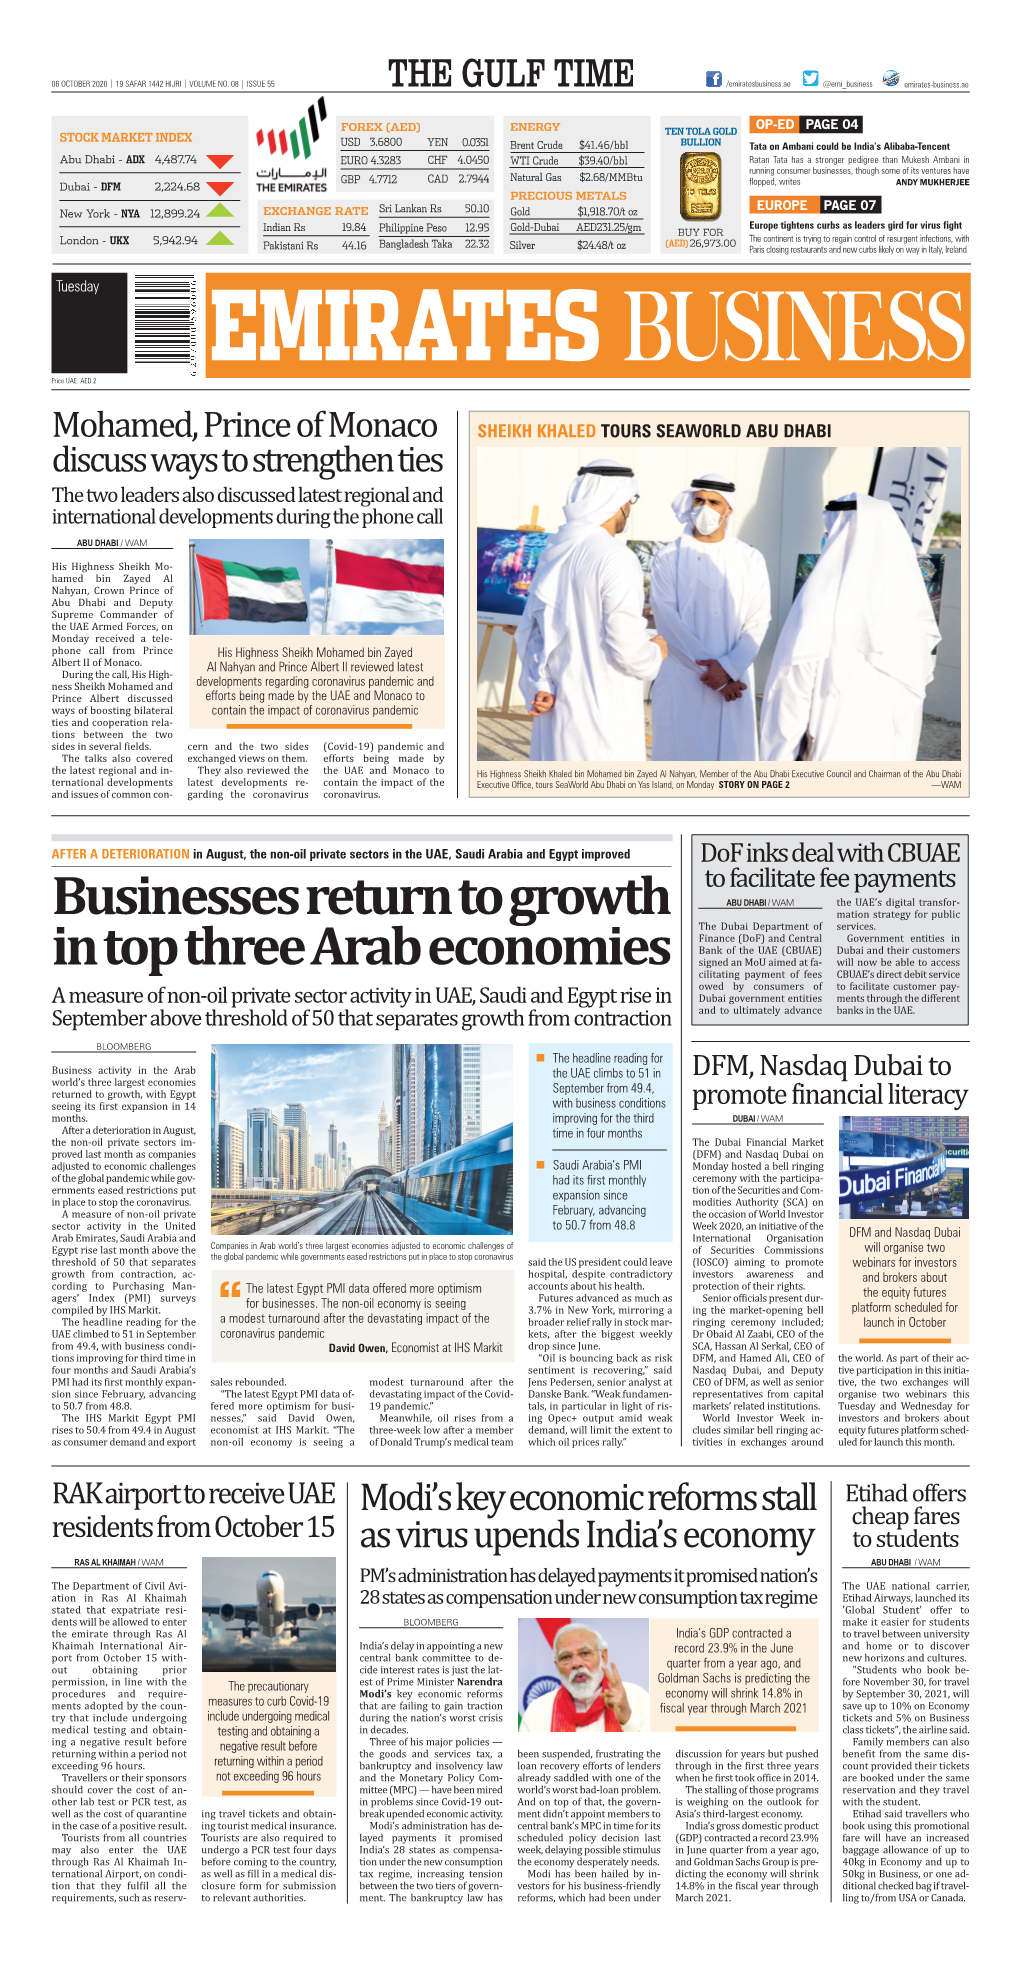 Businesses Return to Growth in Top Three Arab Economies